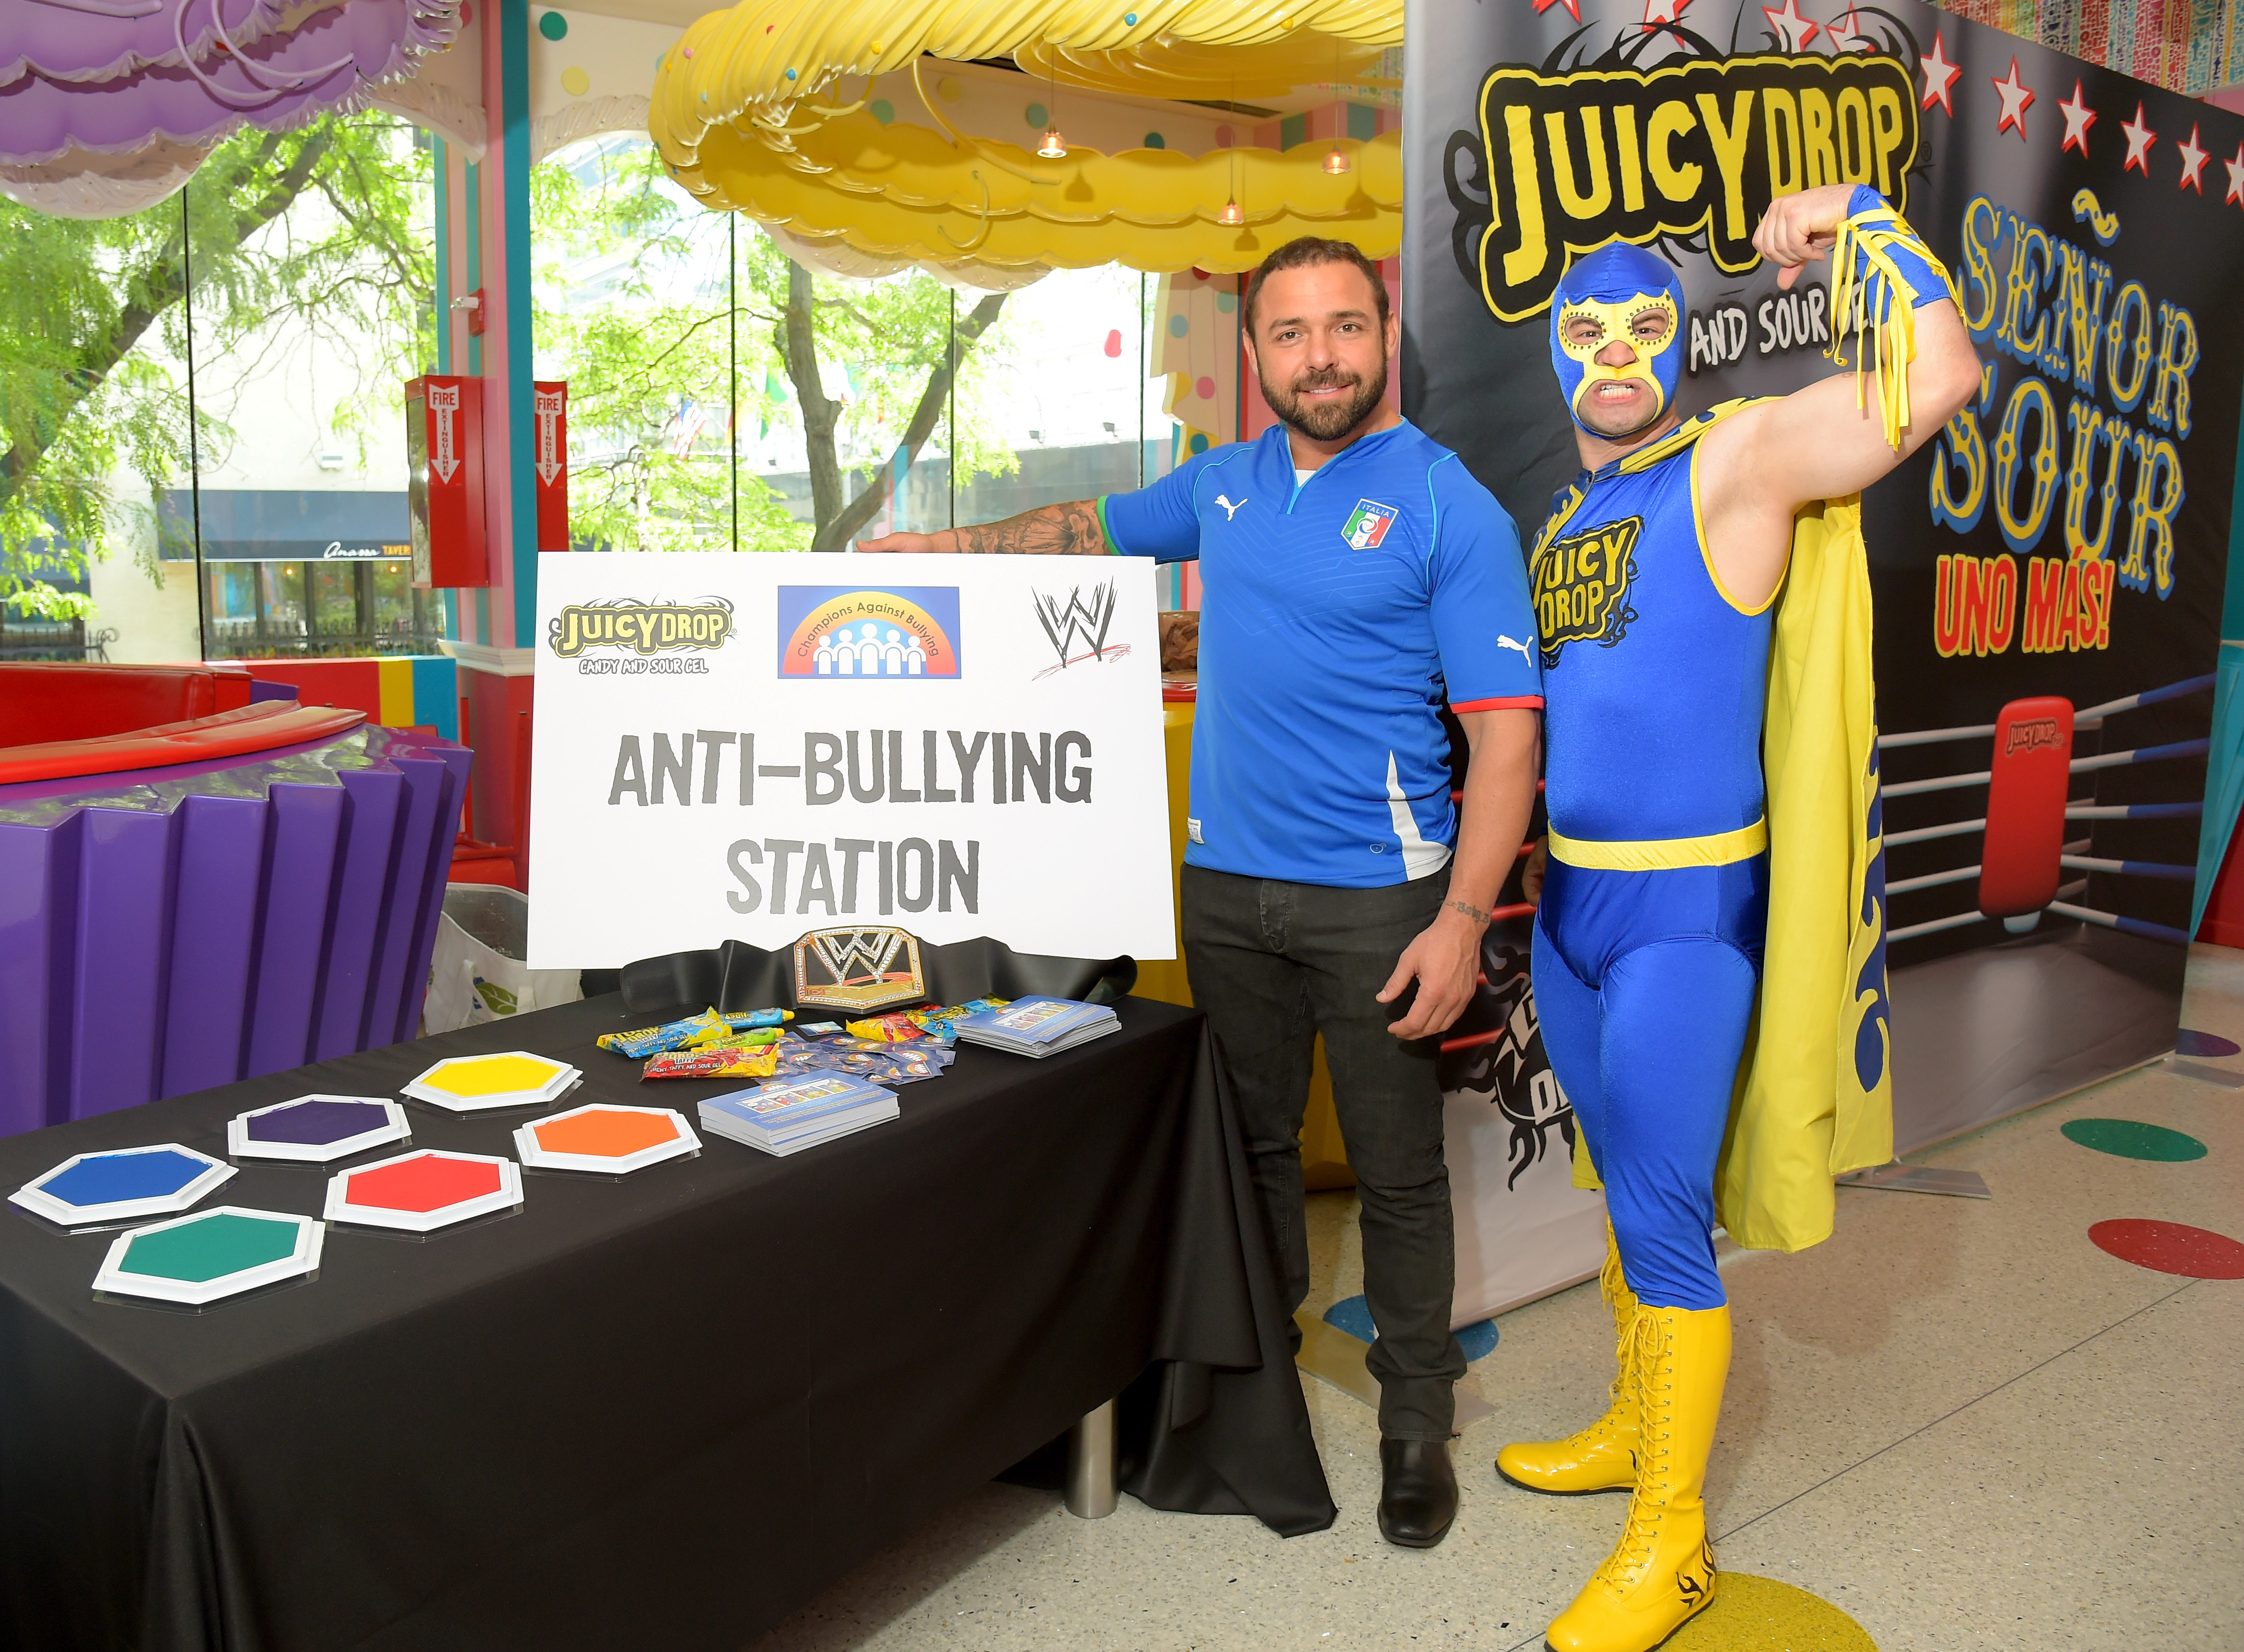 NEW YORK, NY - JULY 02: Senor Sour (R) and Santino Marella attend Juicy Drop and WWE Superstar Santino Marella dare kids to test their limits benefitting Champions Against Bullying at Dylan's Candy Bar on July 2, 2014 in New York City. (Photo by Michael Loccisano/Getty Images for Bazooka Candy Brands/Topps)